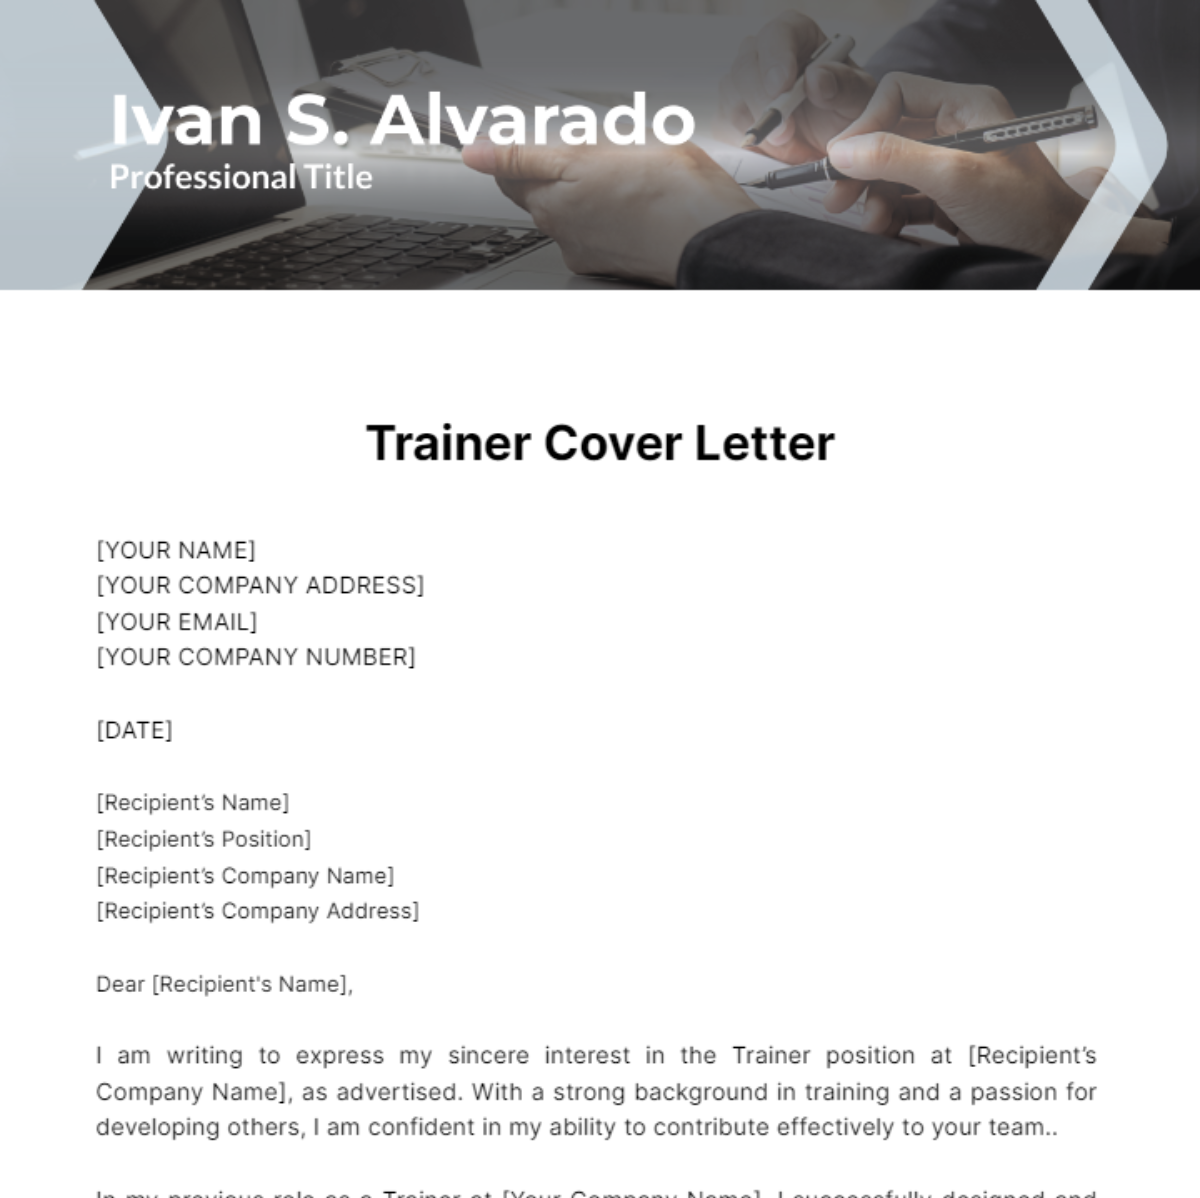 Trainer Cover Letter Template